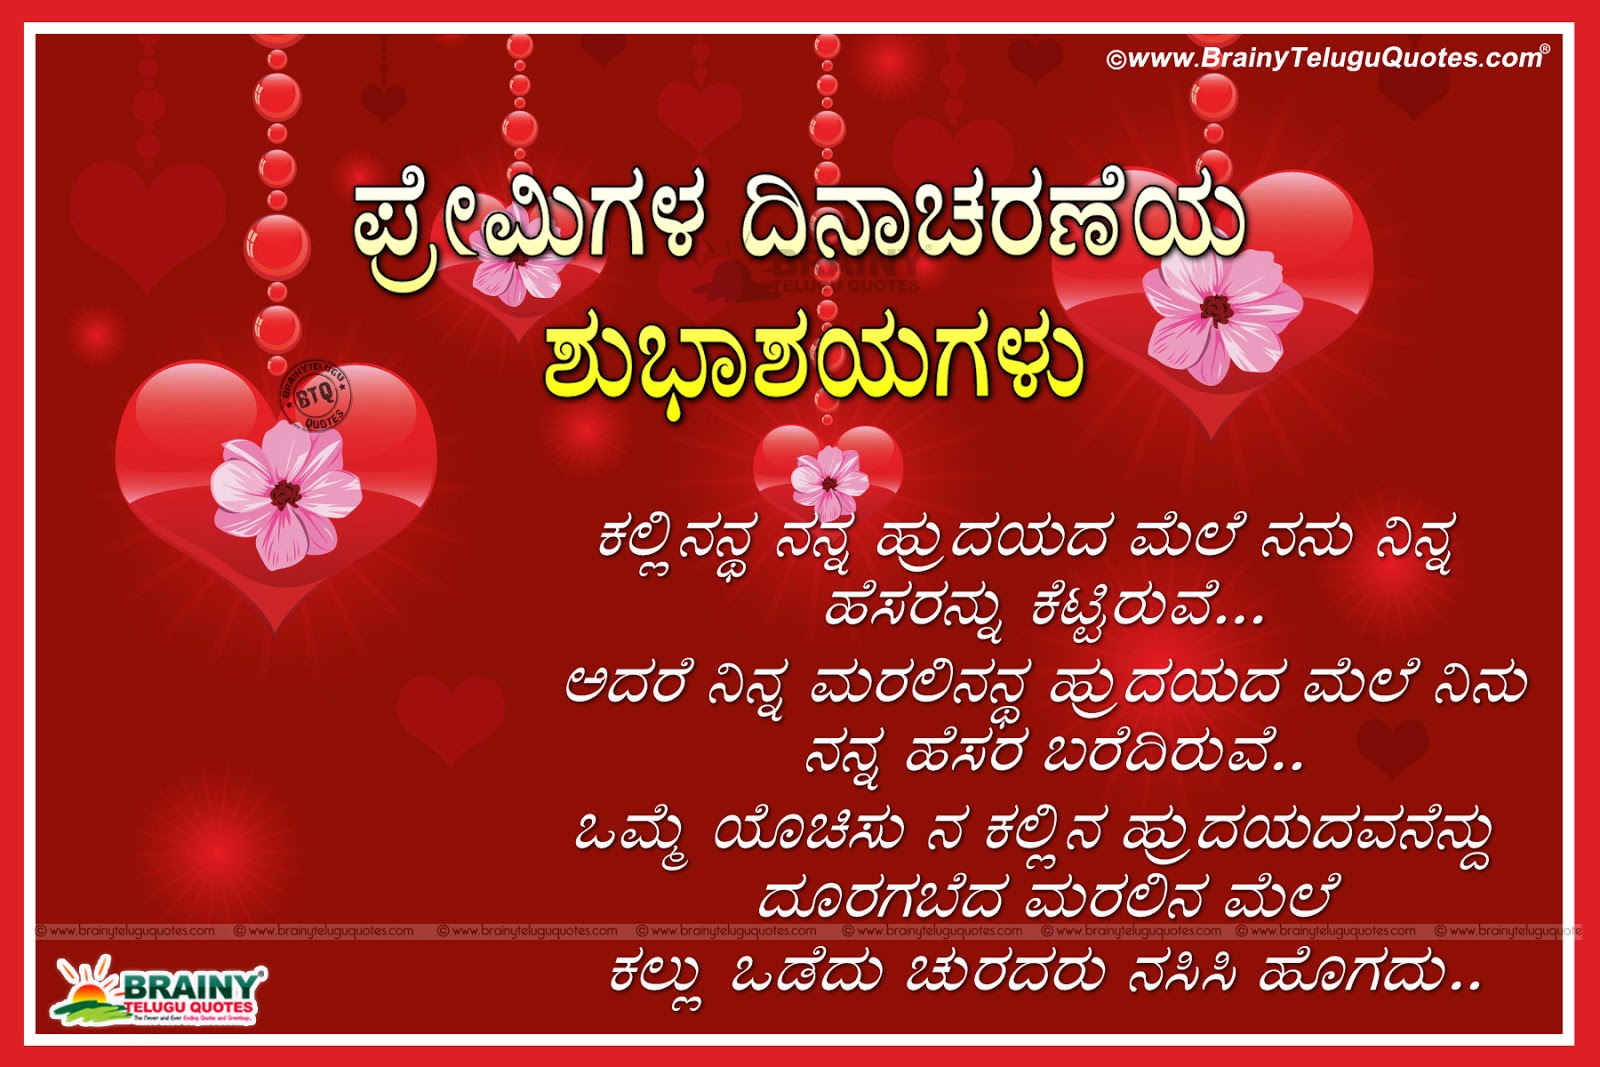 Wedding Anniversary Wishes Kannada Wedding Quotes 36 Quotes